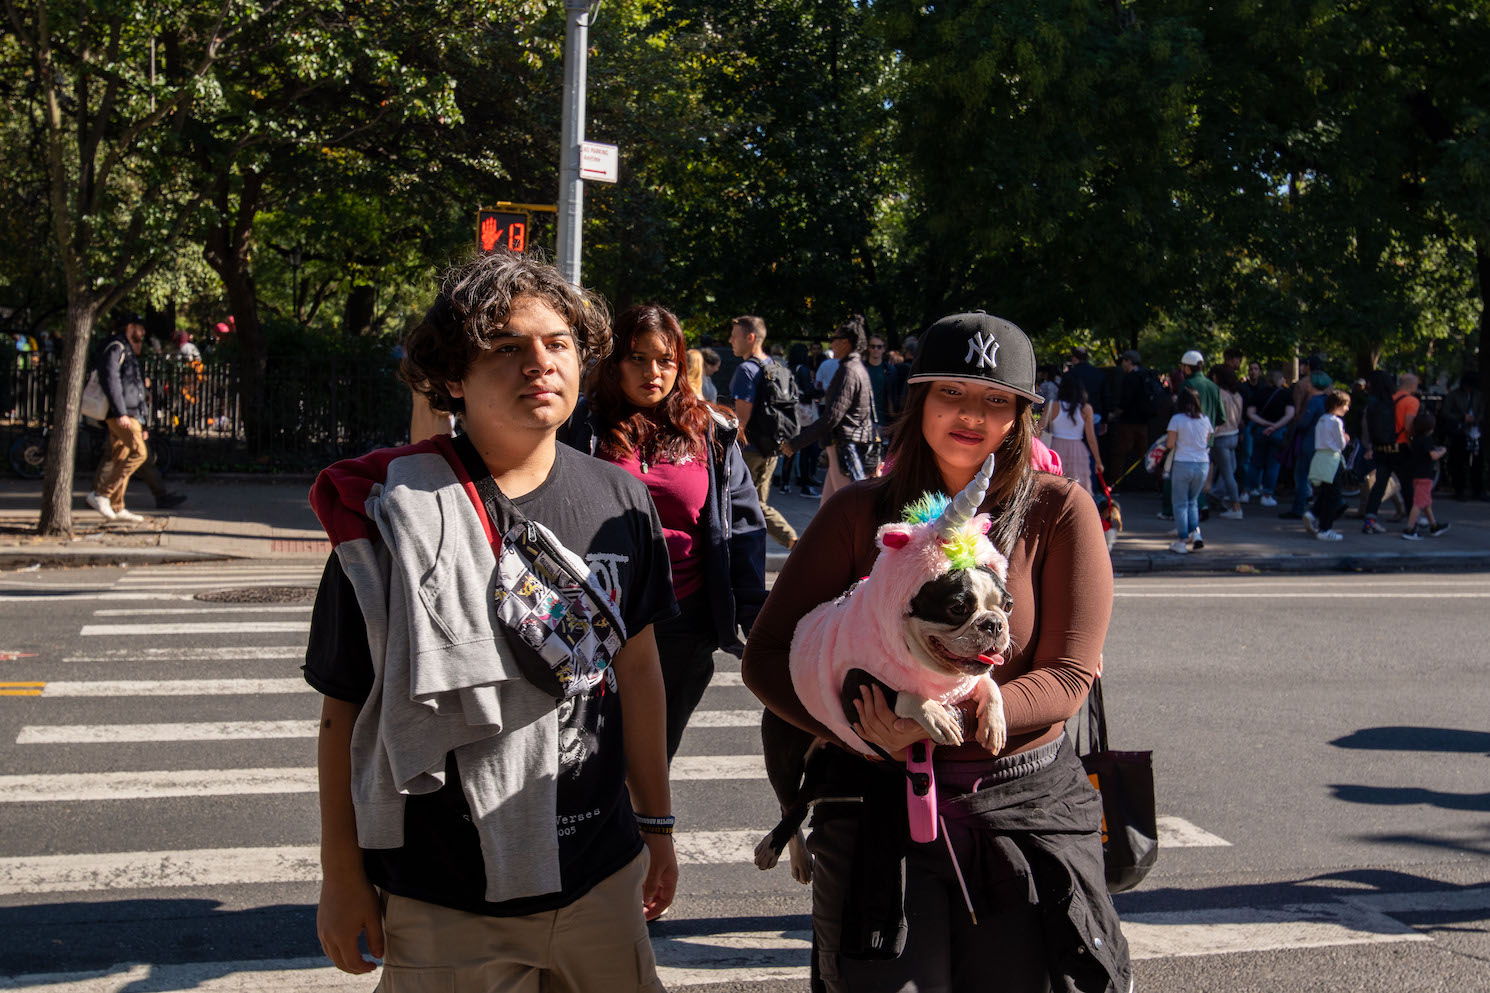 Three people cross the street at Avenue A and 9th Street. One holds a black-and-white dog wearing a pink unicorn costume, and the other two are not wearing costumes. A crowd walks through the park behind them.